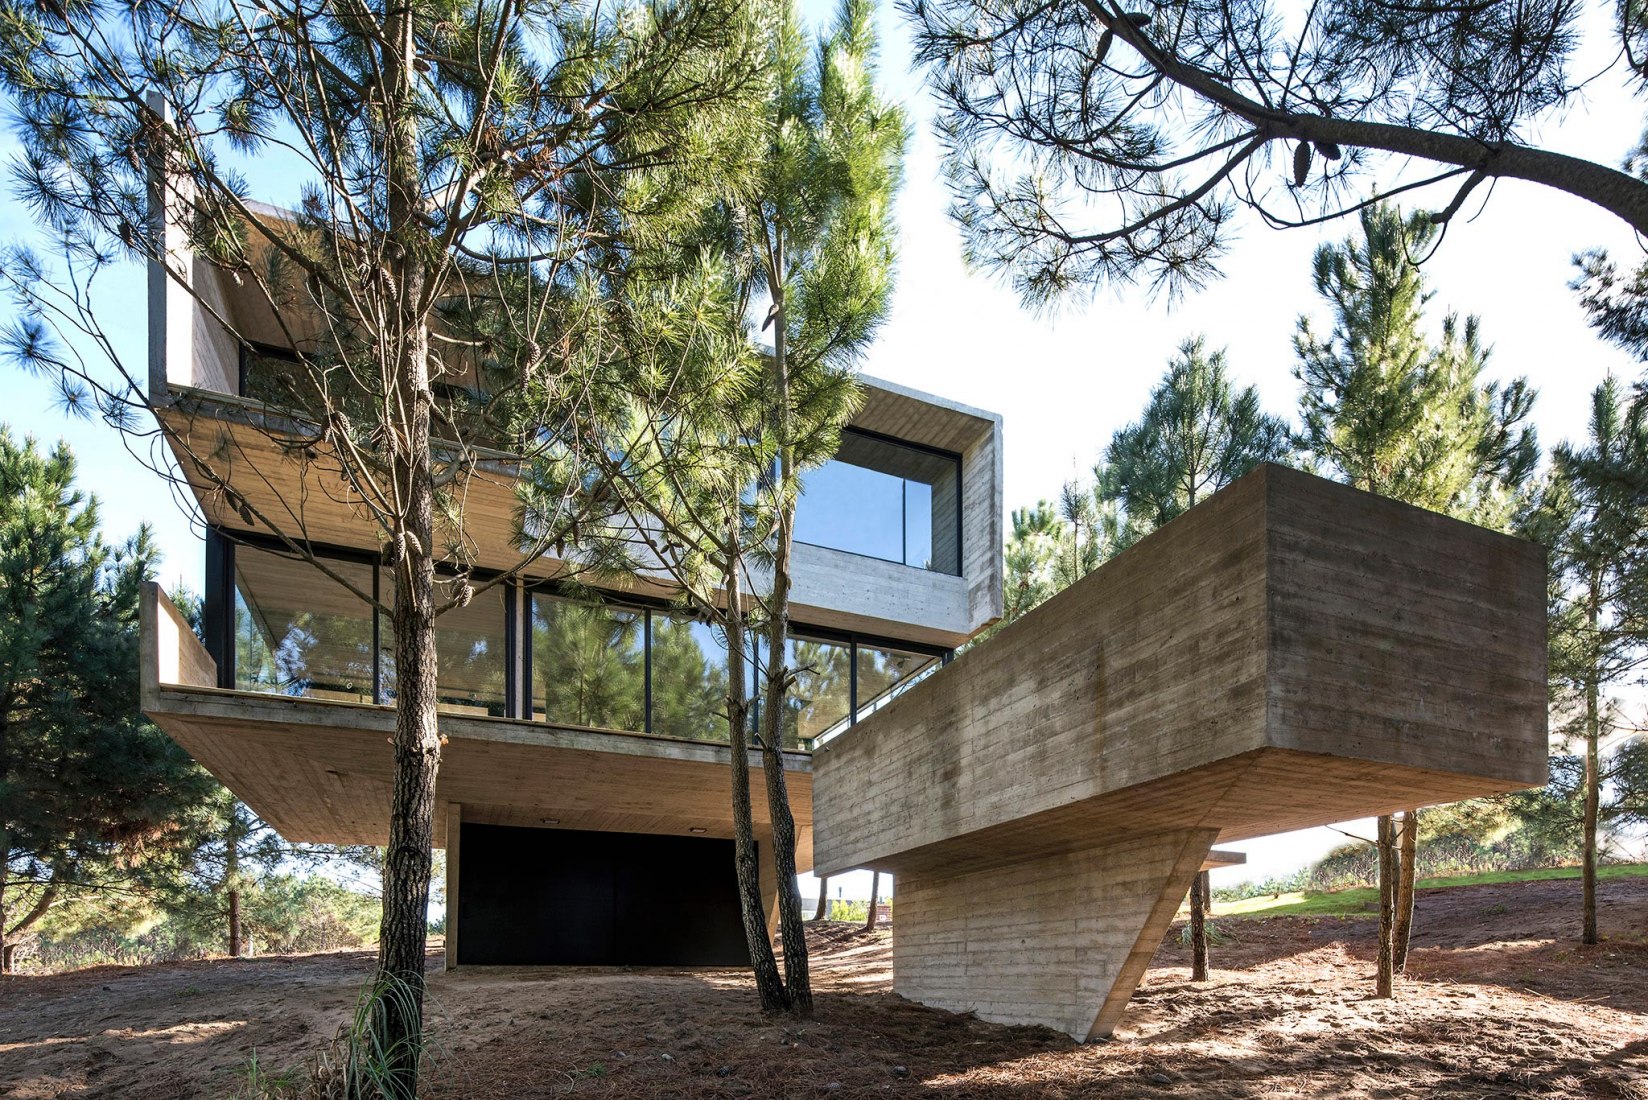 House in the trees by Luciano Kruk. Photograph by Daniela Mac Adden